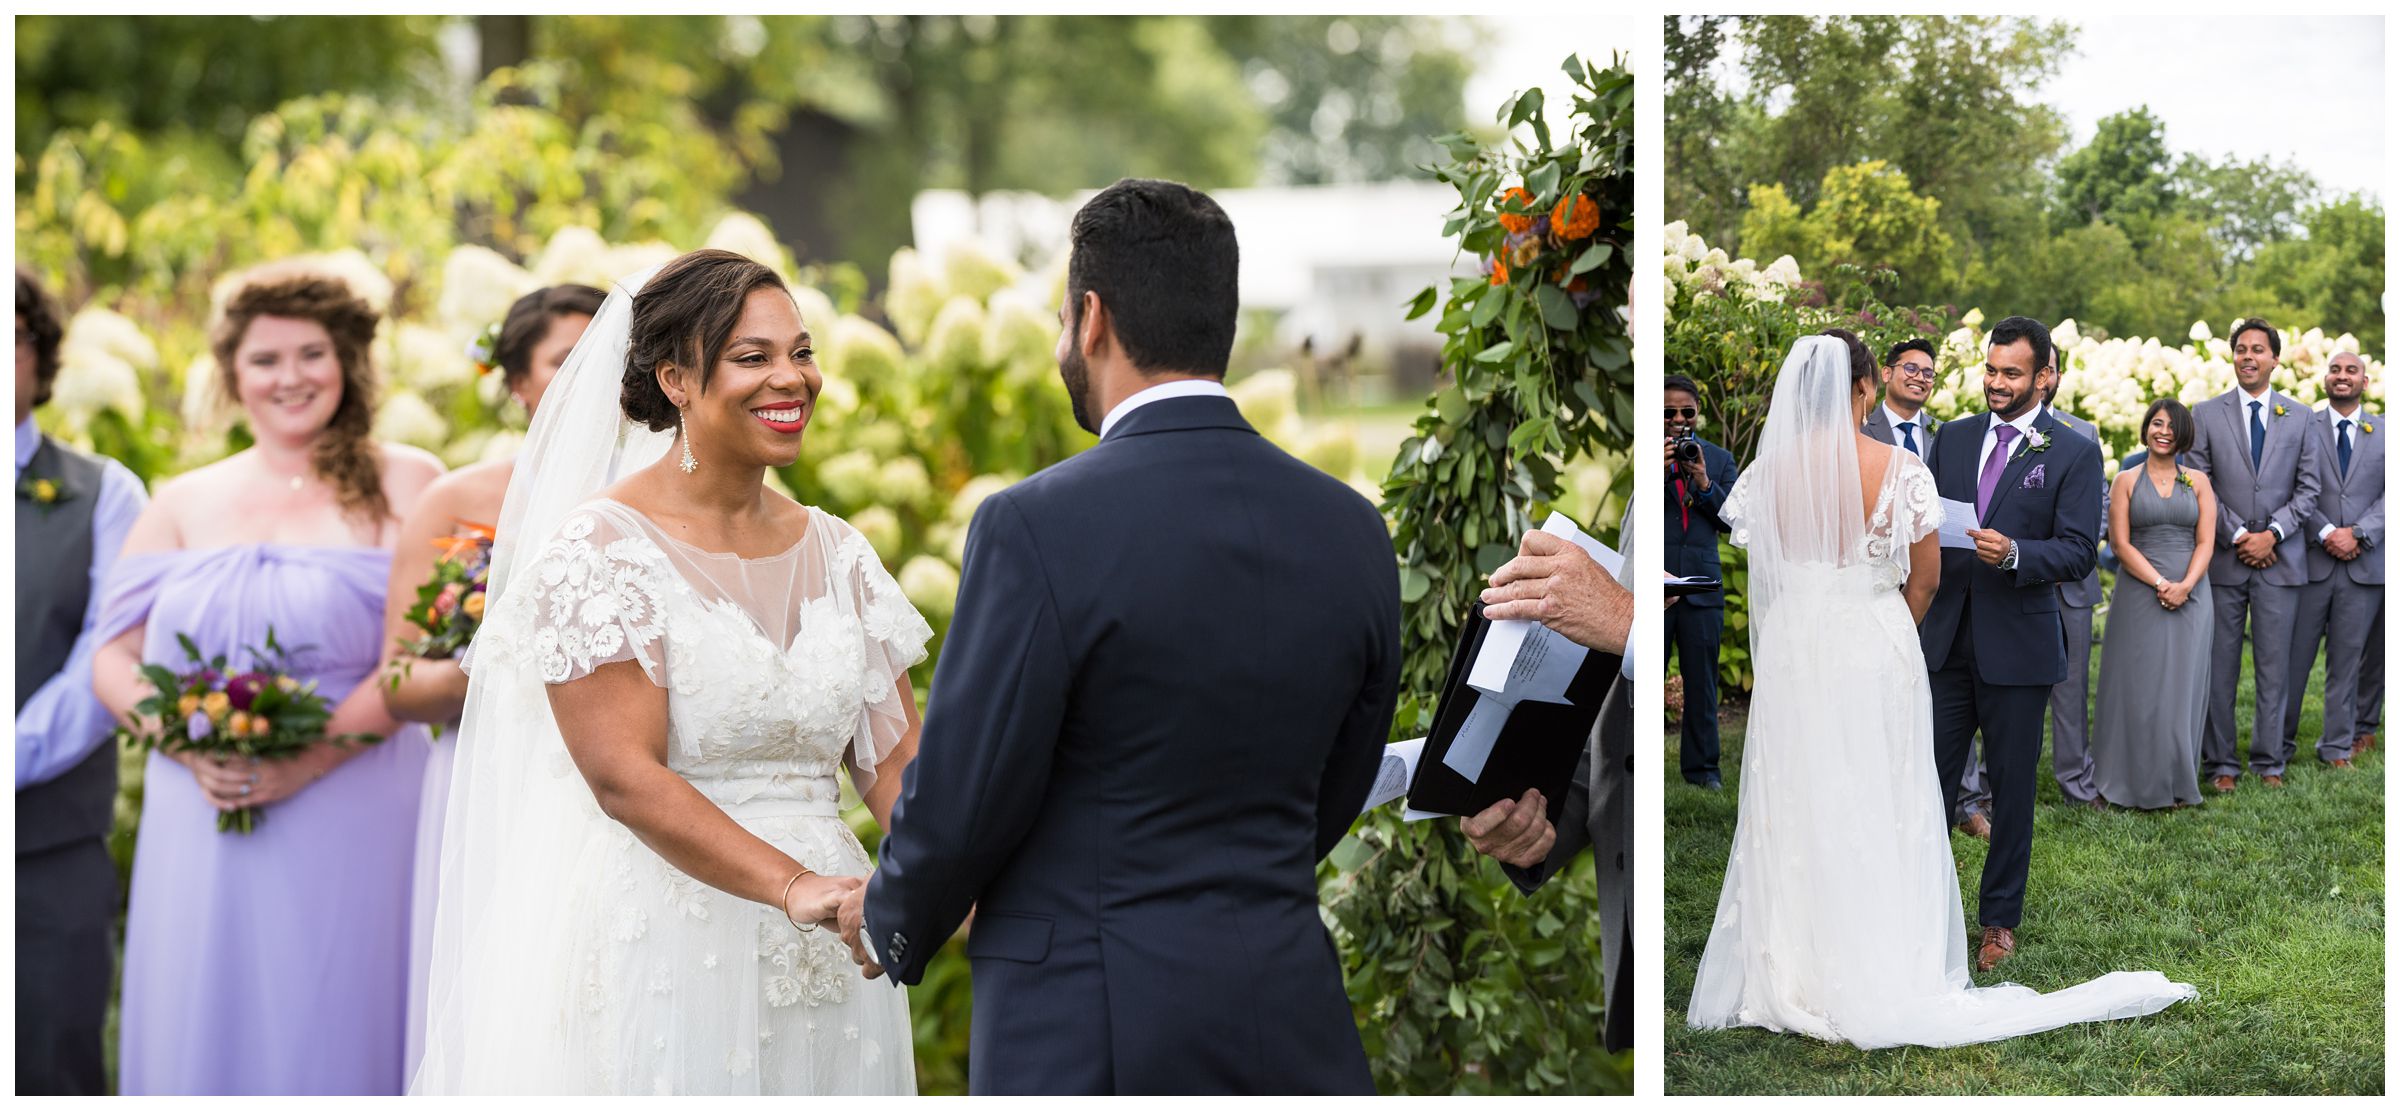 Indian groom and African American bride exchanging vows during summer wedding ceremony at Jorgensen Farms in Columbus Ohio